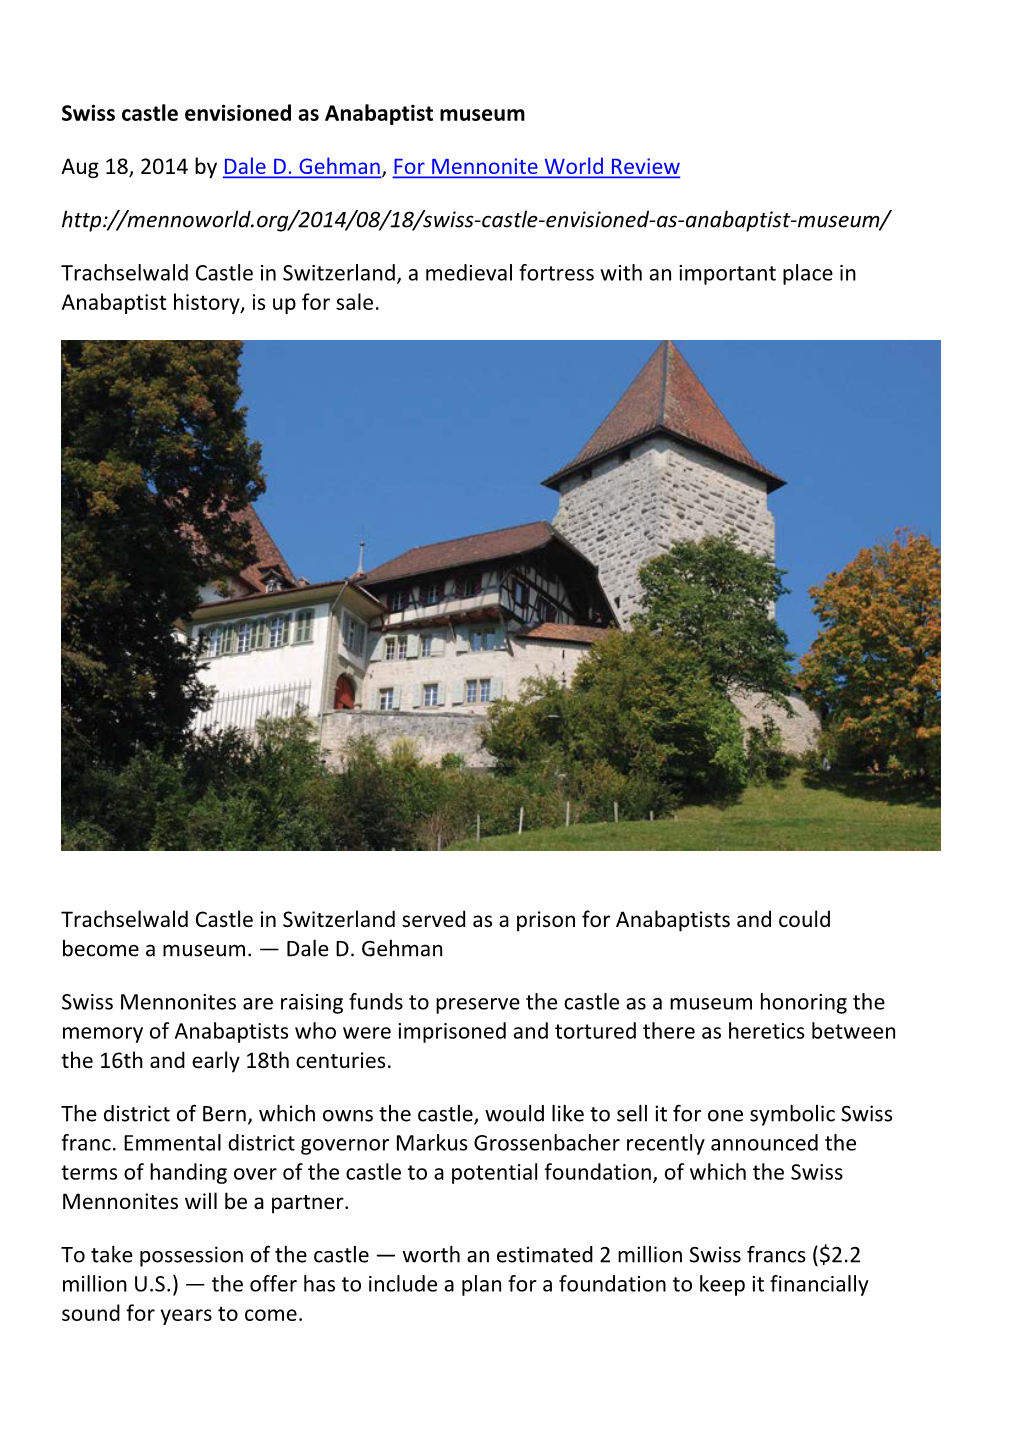 Swiss Castle Envisioned As Anabaptist Museum Aug 18, 2014 by Dale D